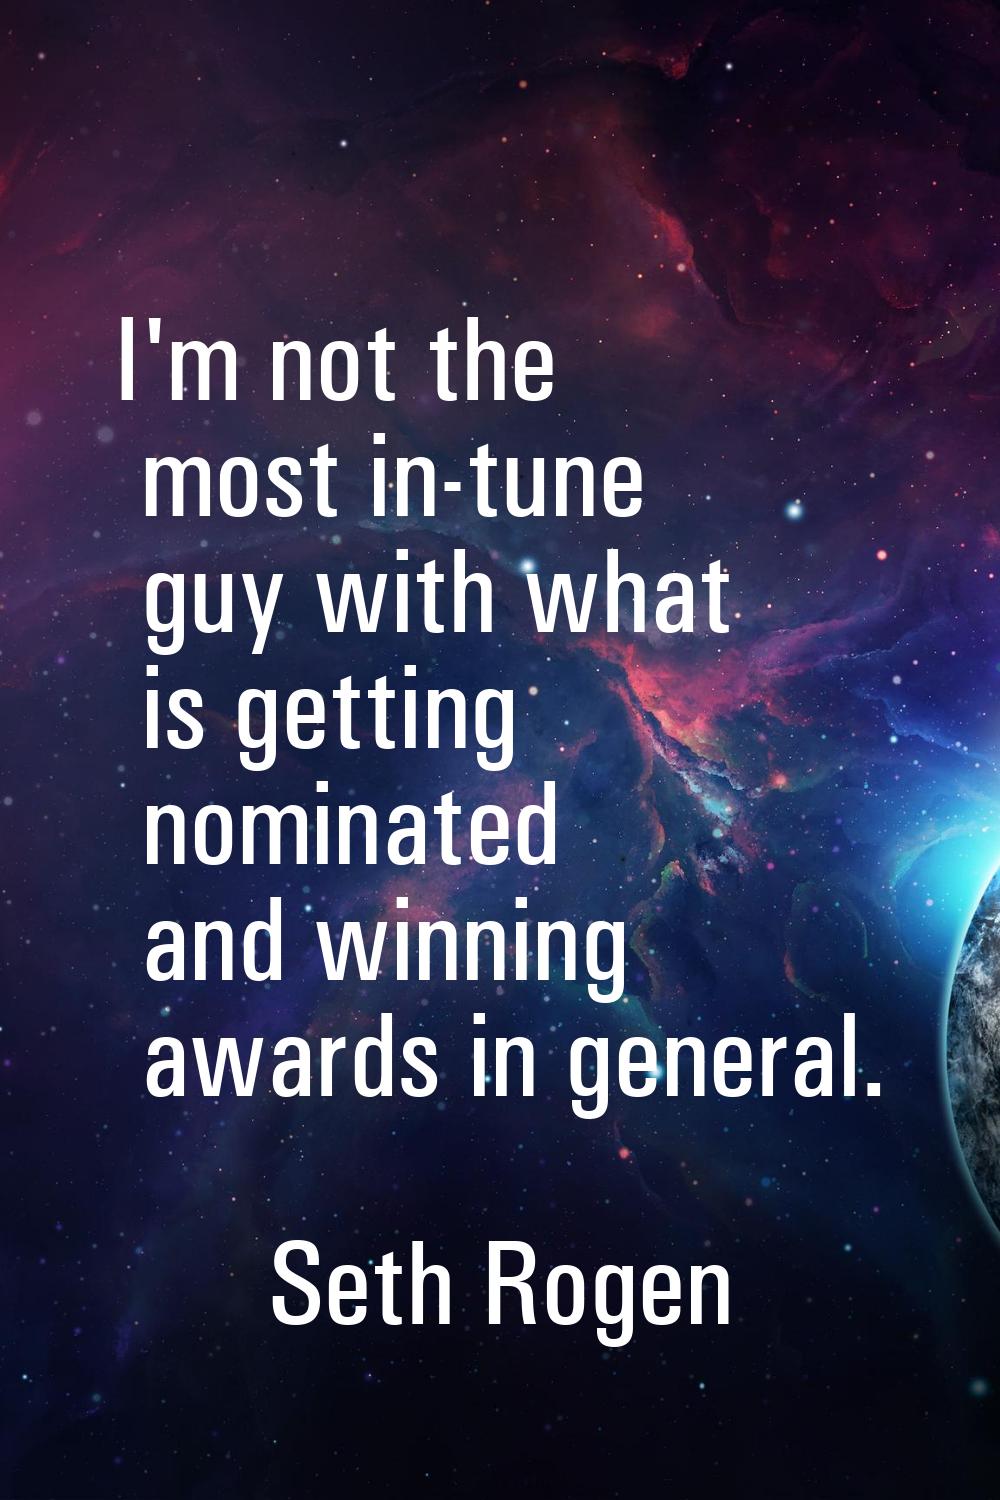 I'm not the most in-tune guy with what is getting nominated and winning awards in general.